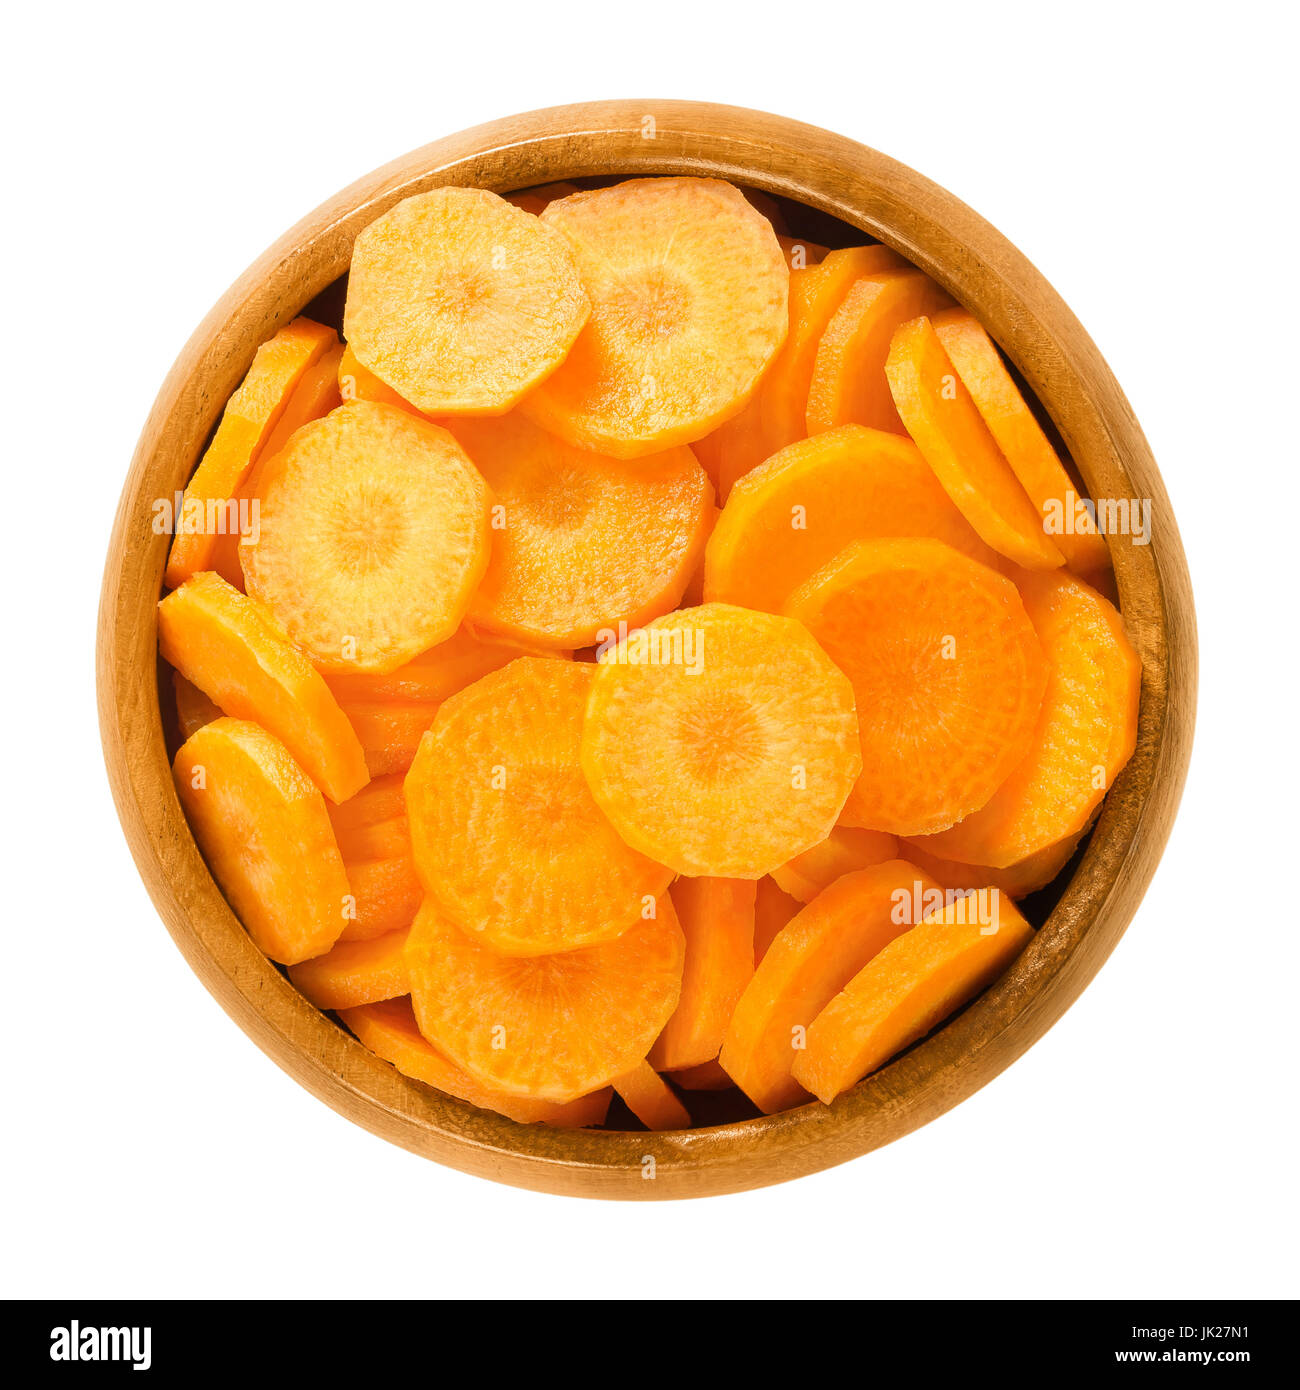 Carrot slices in wooden bowl. Fresh cut crisp slivers of Daucus carota, a root vegetable with orange color. Edible taproot pieces. Photo. Stock Photo